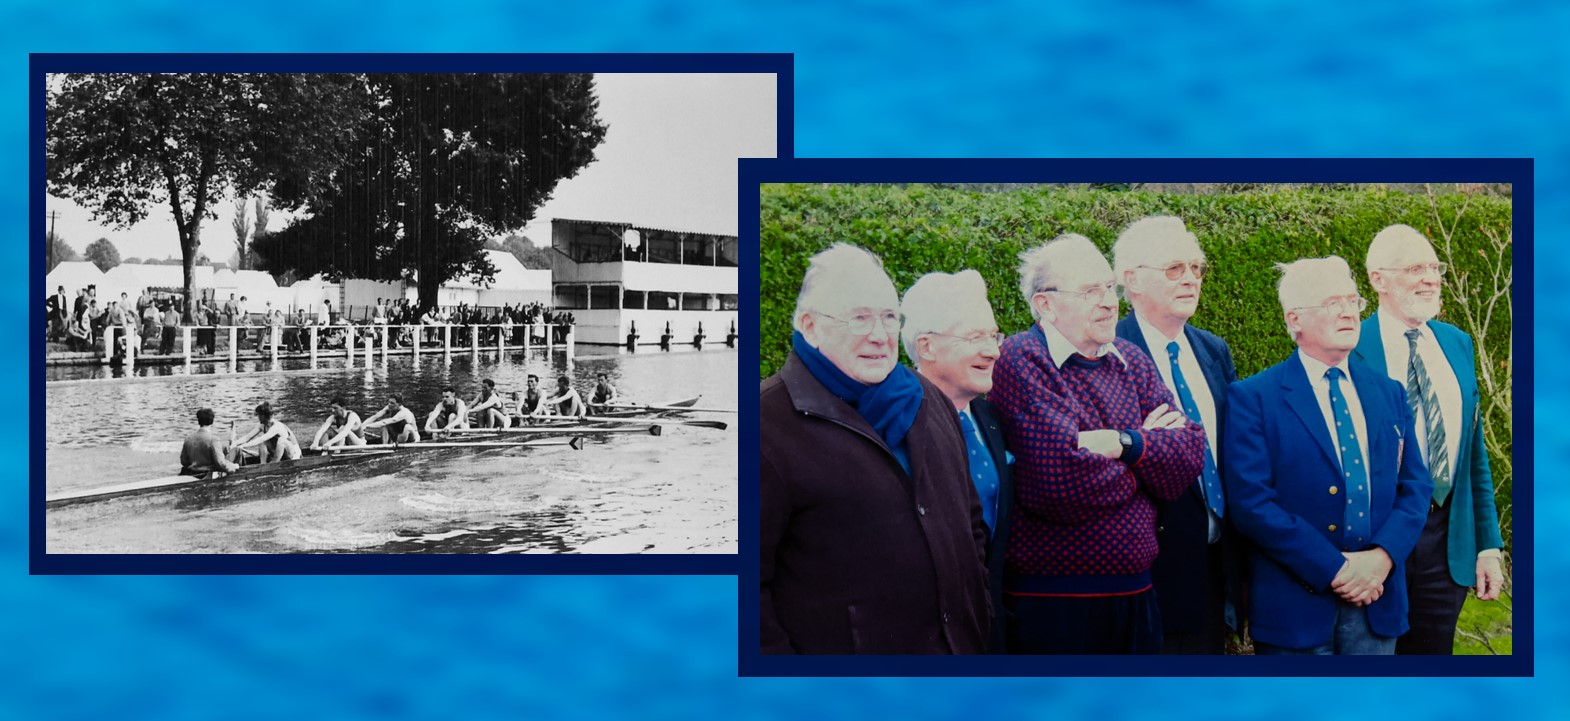 Empire and Commonwealth games rowers - 1958 and 2008